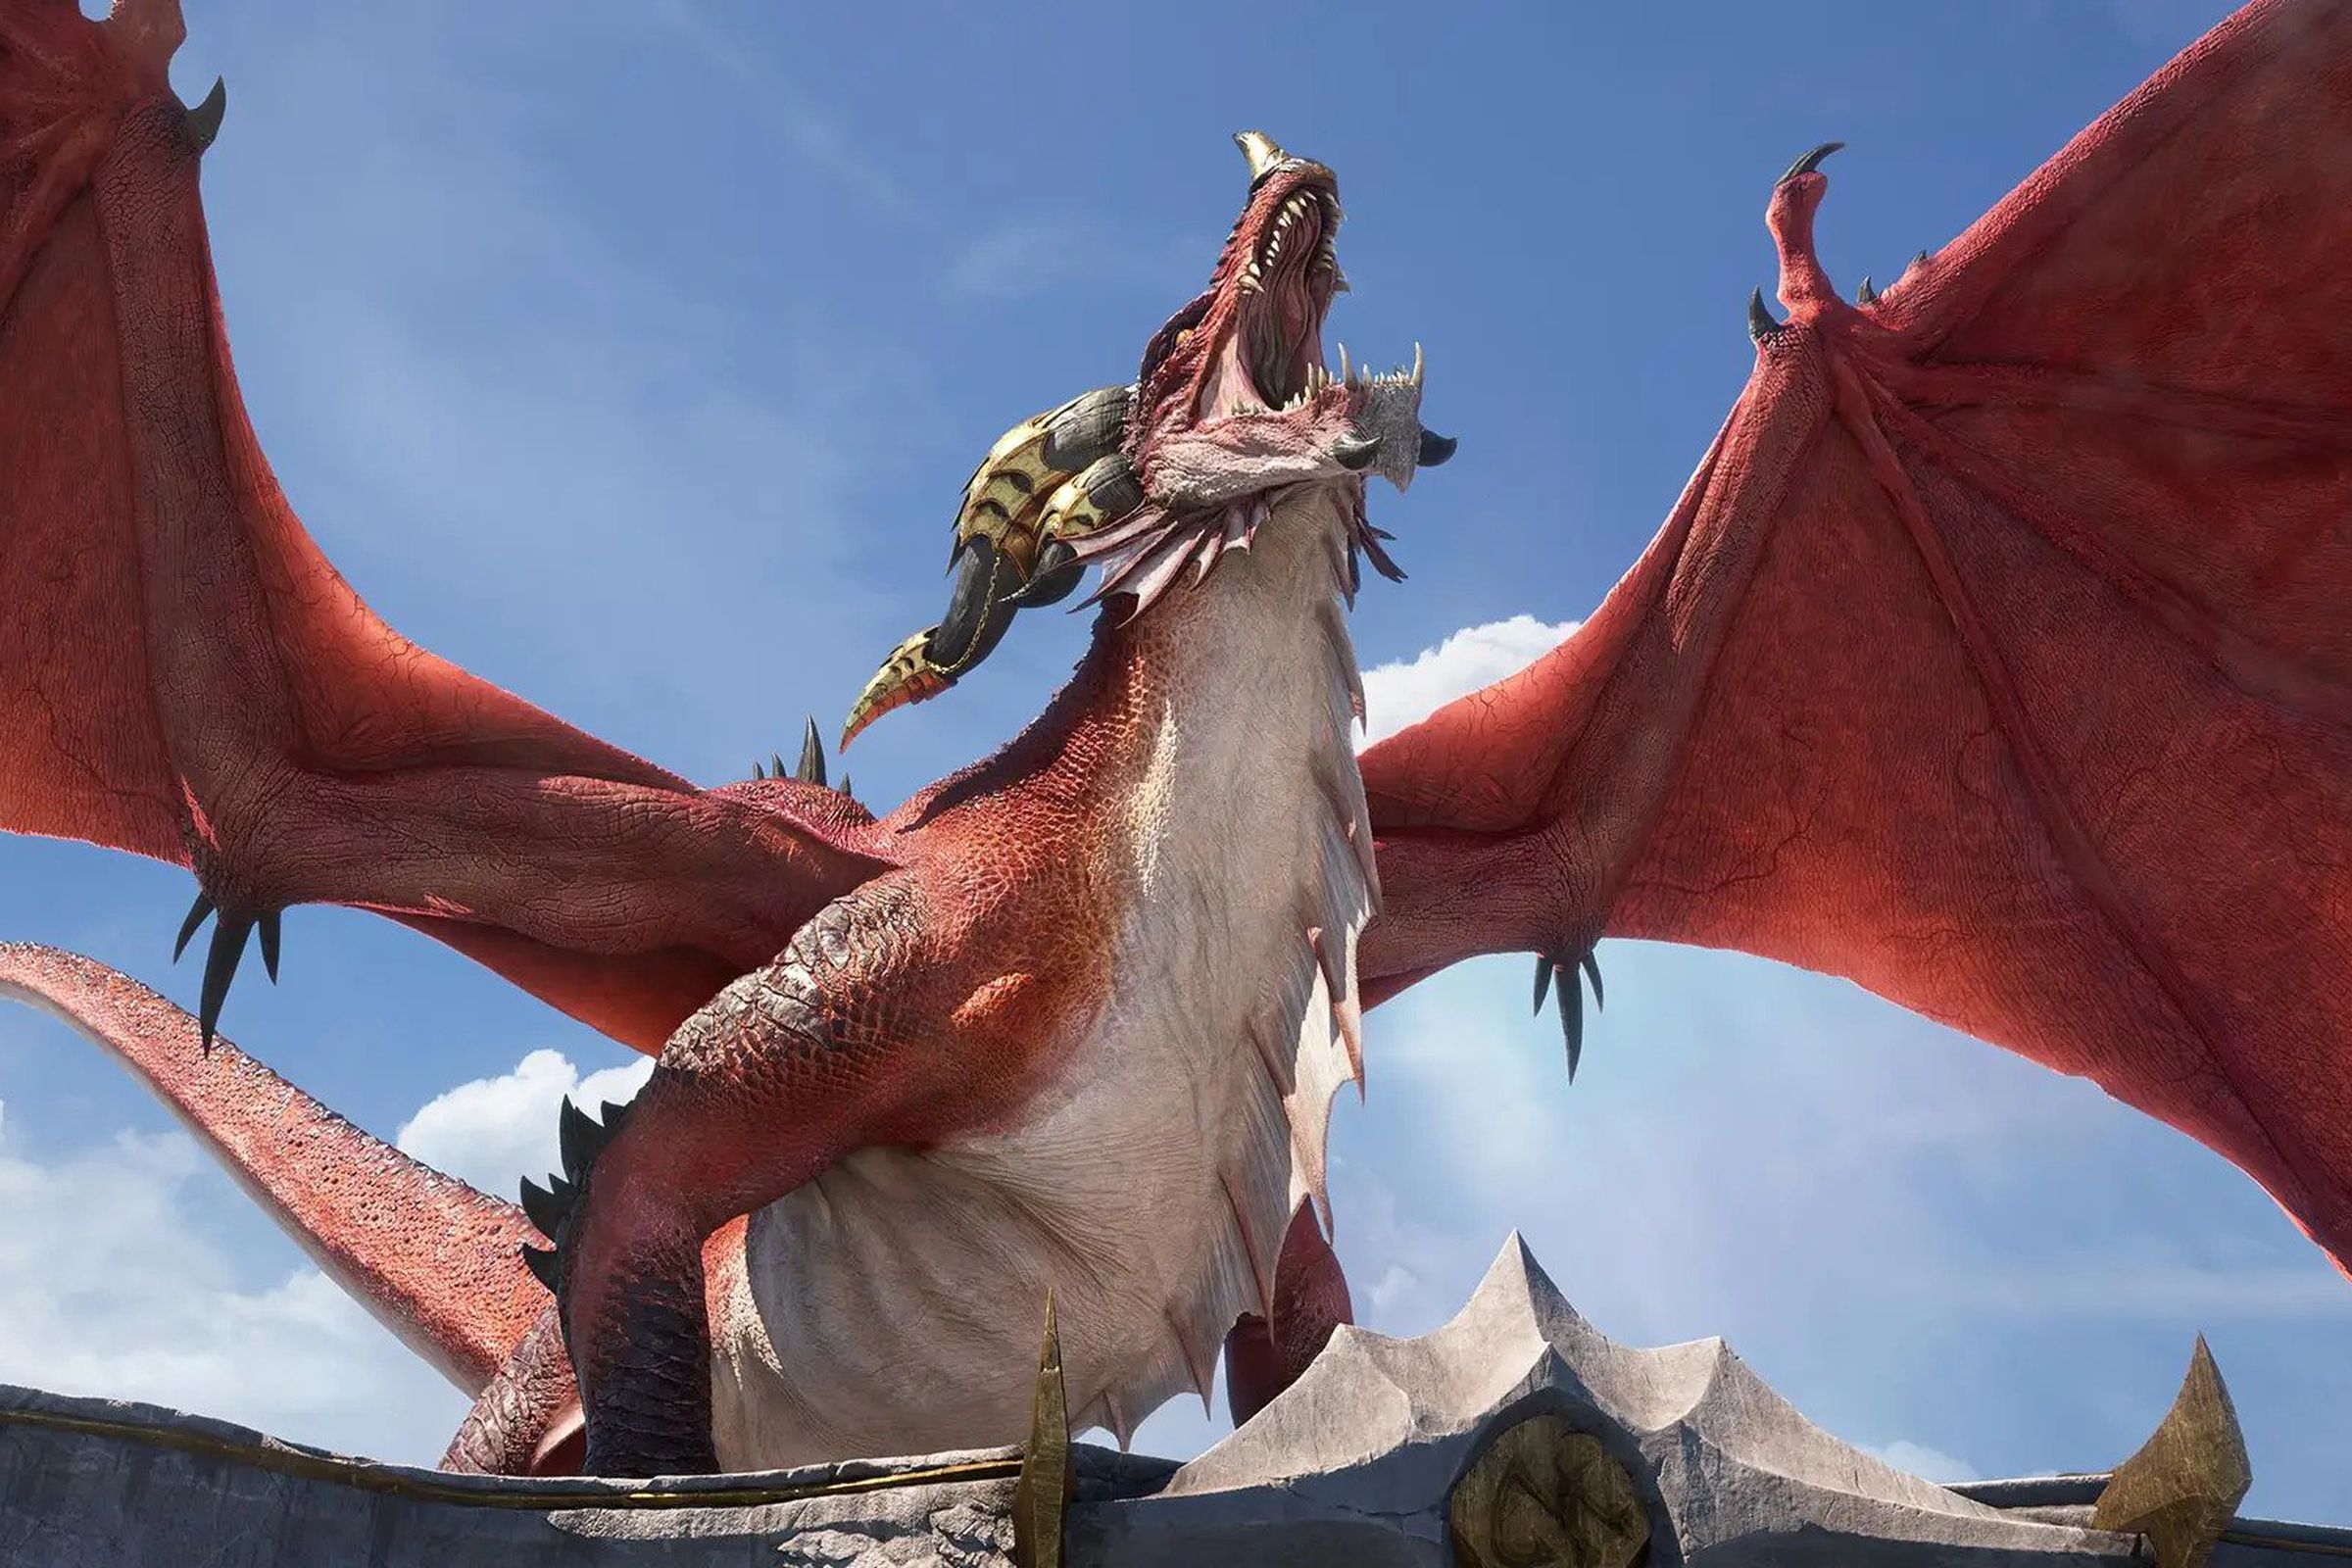 Still image from the World of Warcraft: Dragonflight launch trailer featuring a red dragon with a pale belly unfurling its wings and roaring against a bright blue sky.